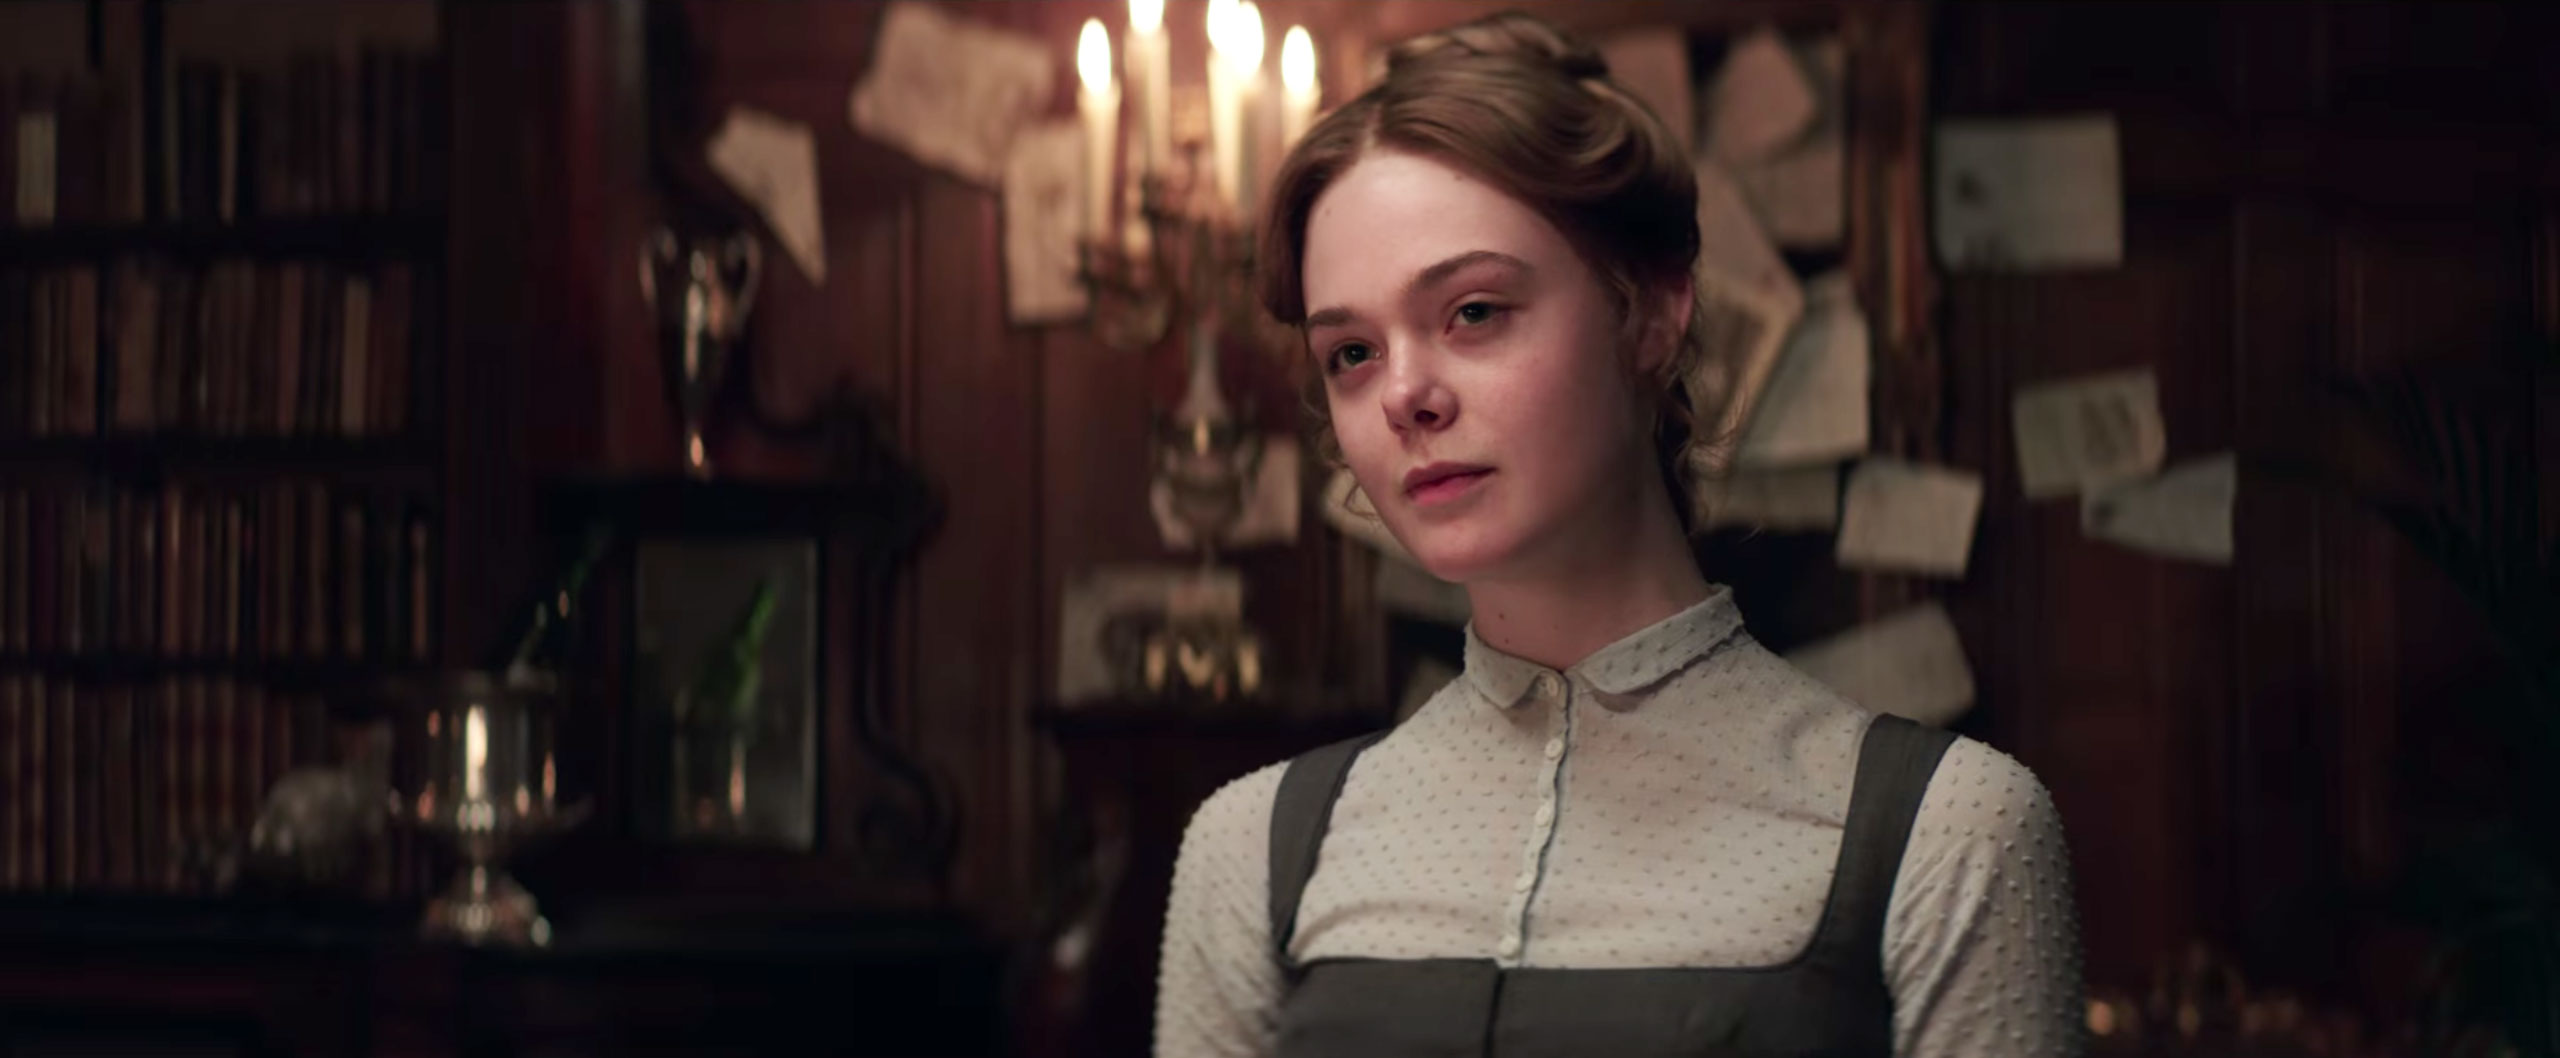 Elle Fanning is Your Angsty, Pre Frankenstein Mary Shelley